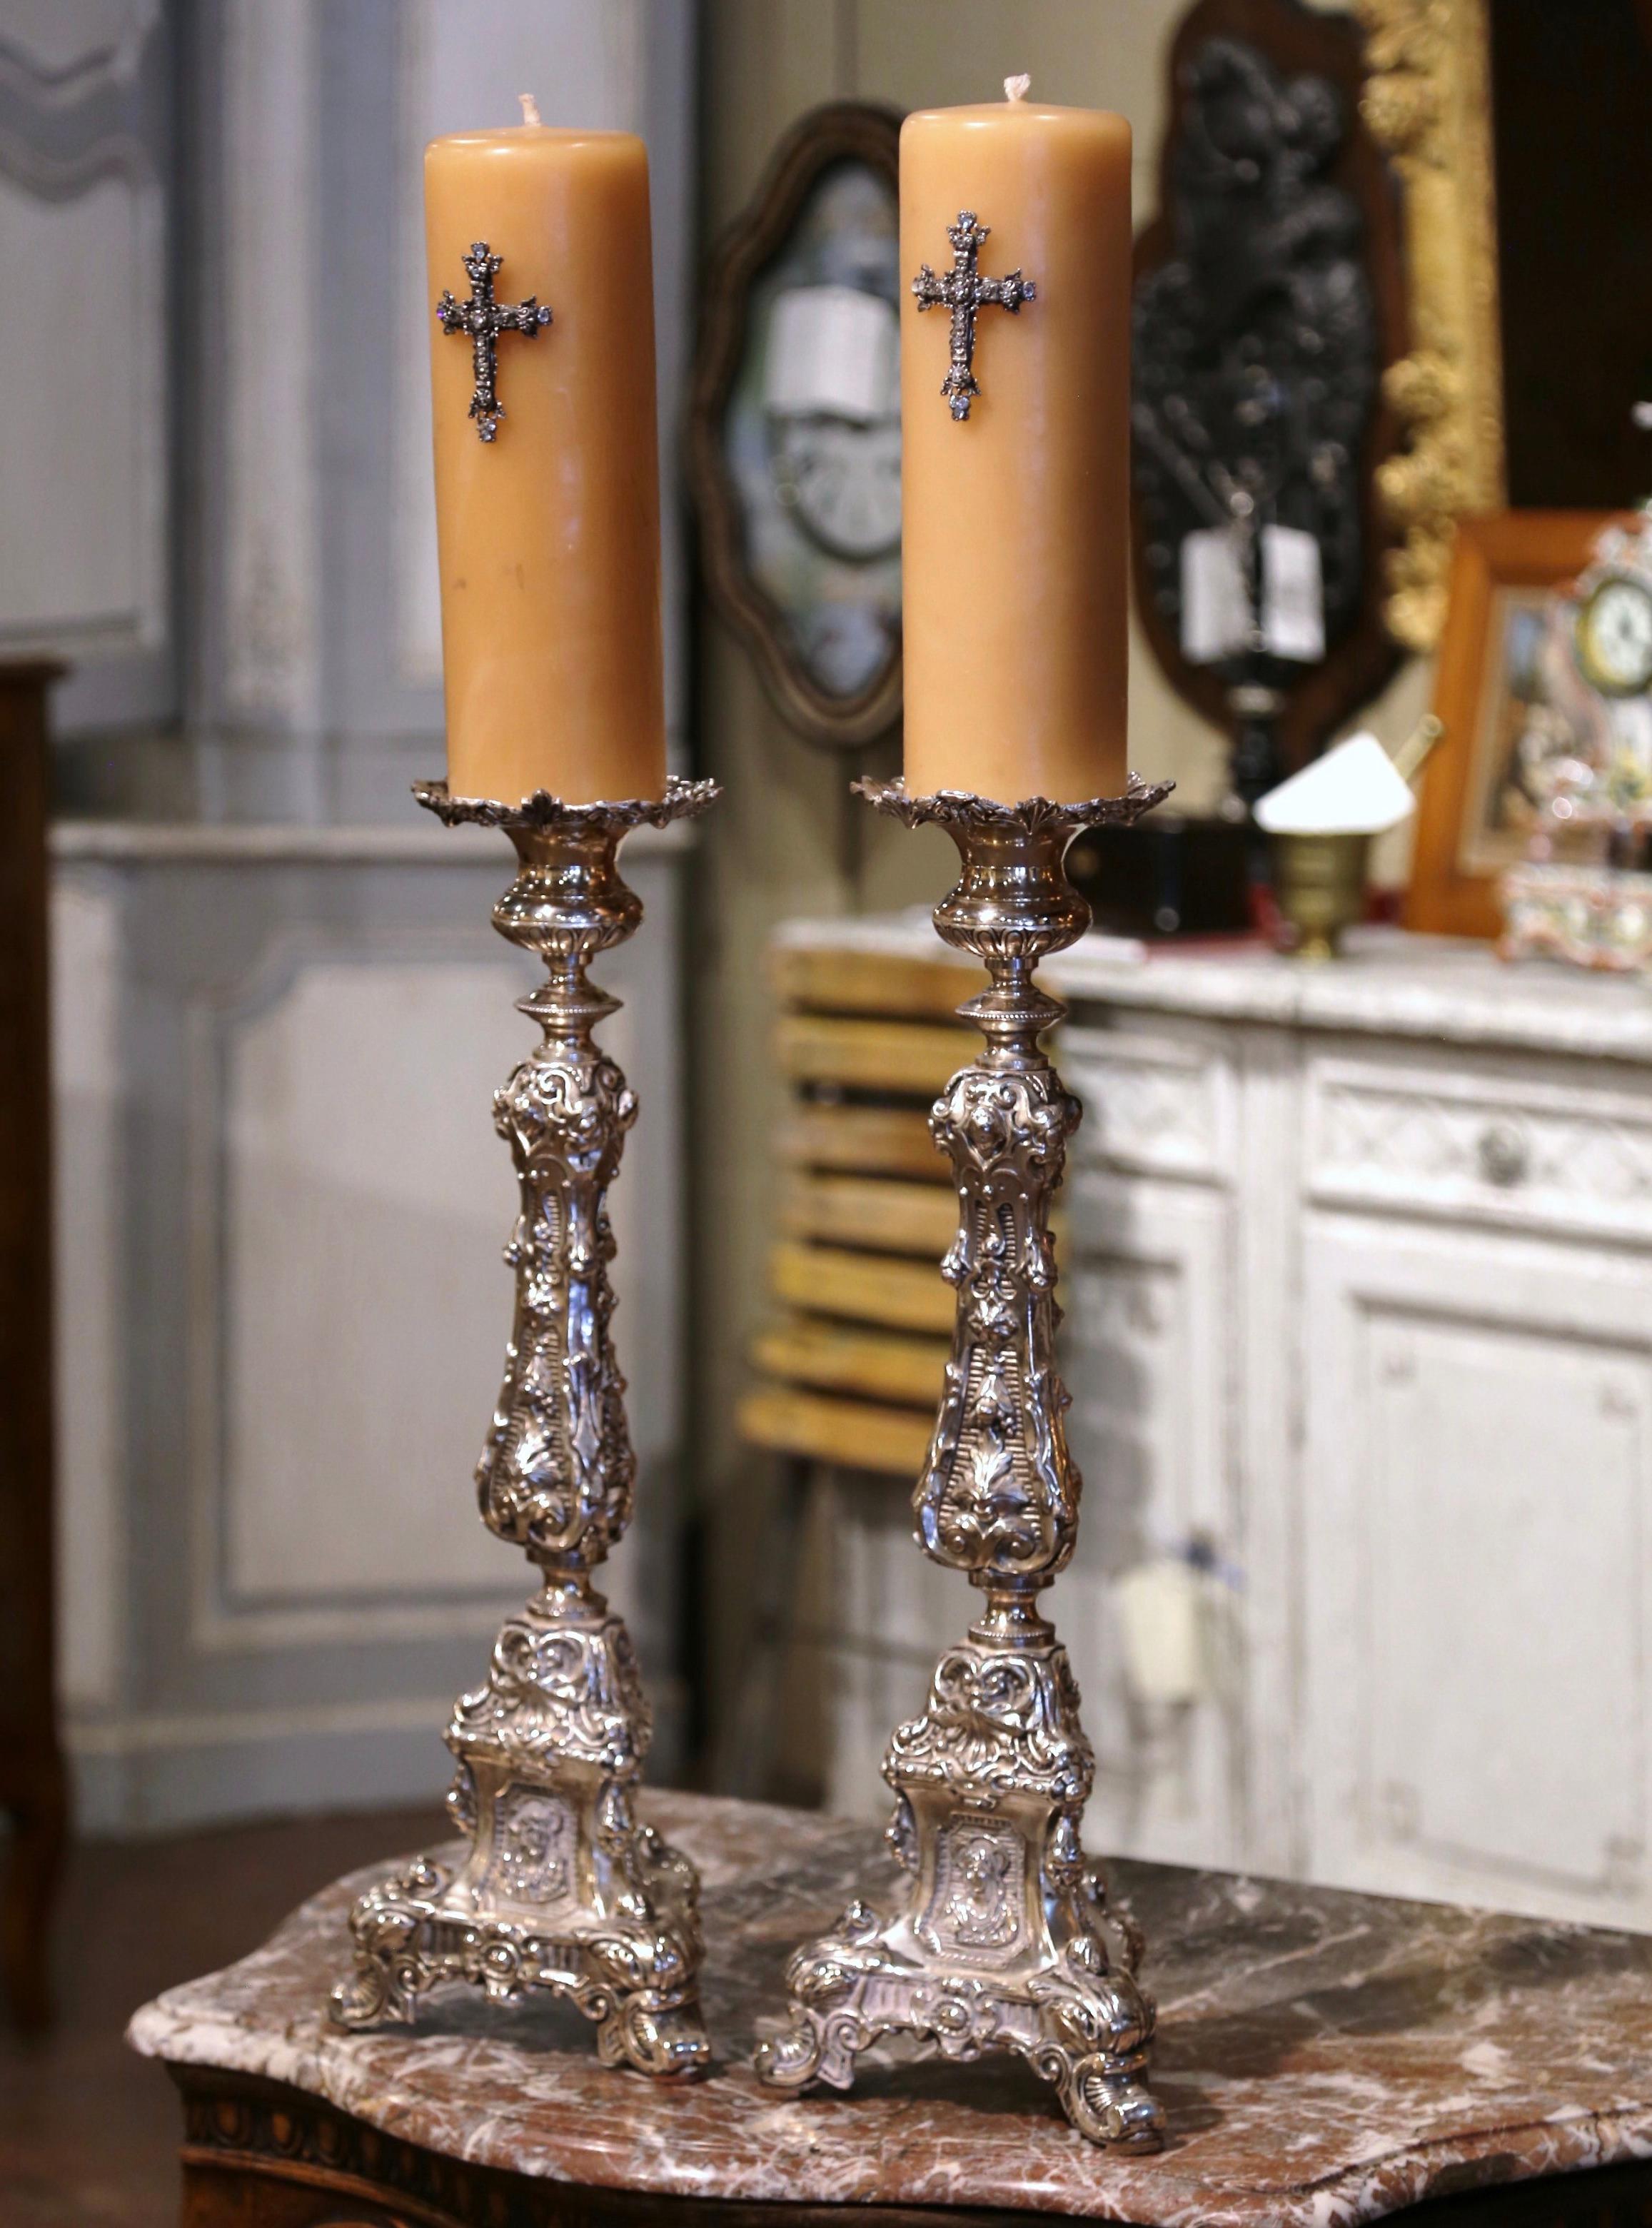 Add an air of drama and elegance to your home with this important pair of antique candlesticks with wax candles. Crafted in France circa 1870, each church candle holder stands on a sturdy triangle base decorated with acanthus leaf motifs over three